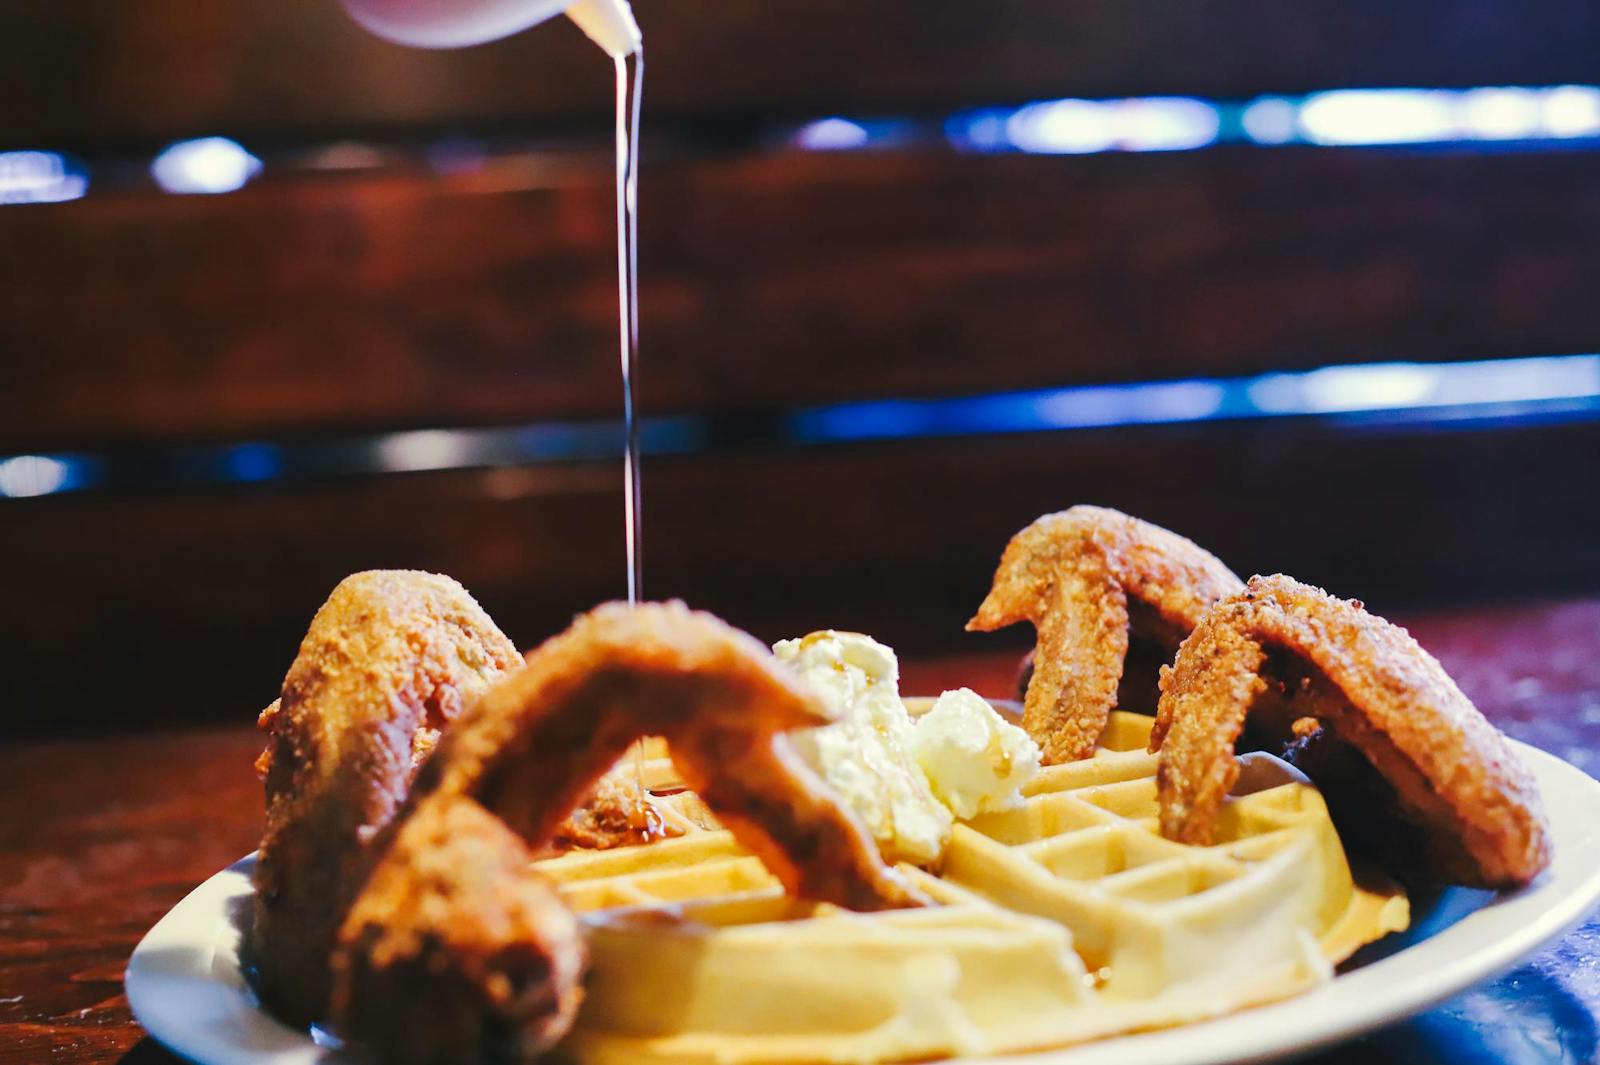 Photo for Best Black-Owned Business: Kiki's Chicken and Waffles